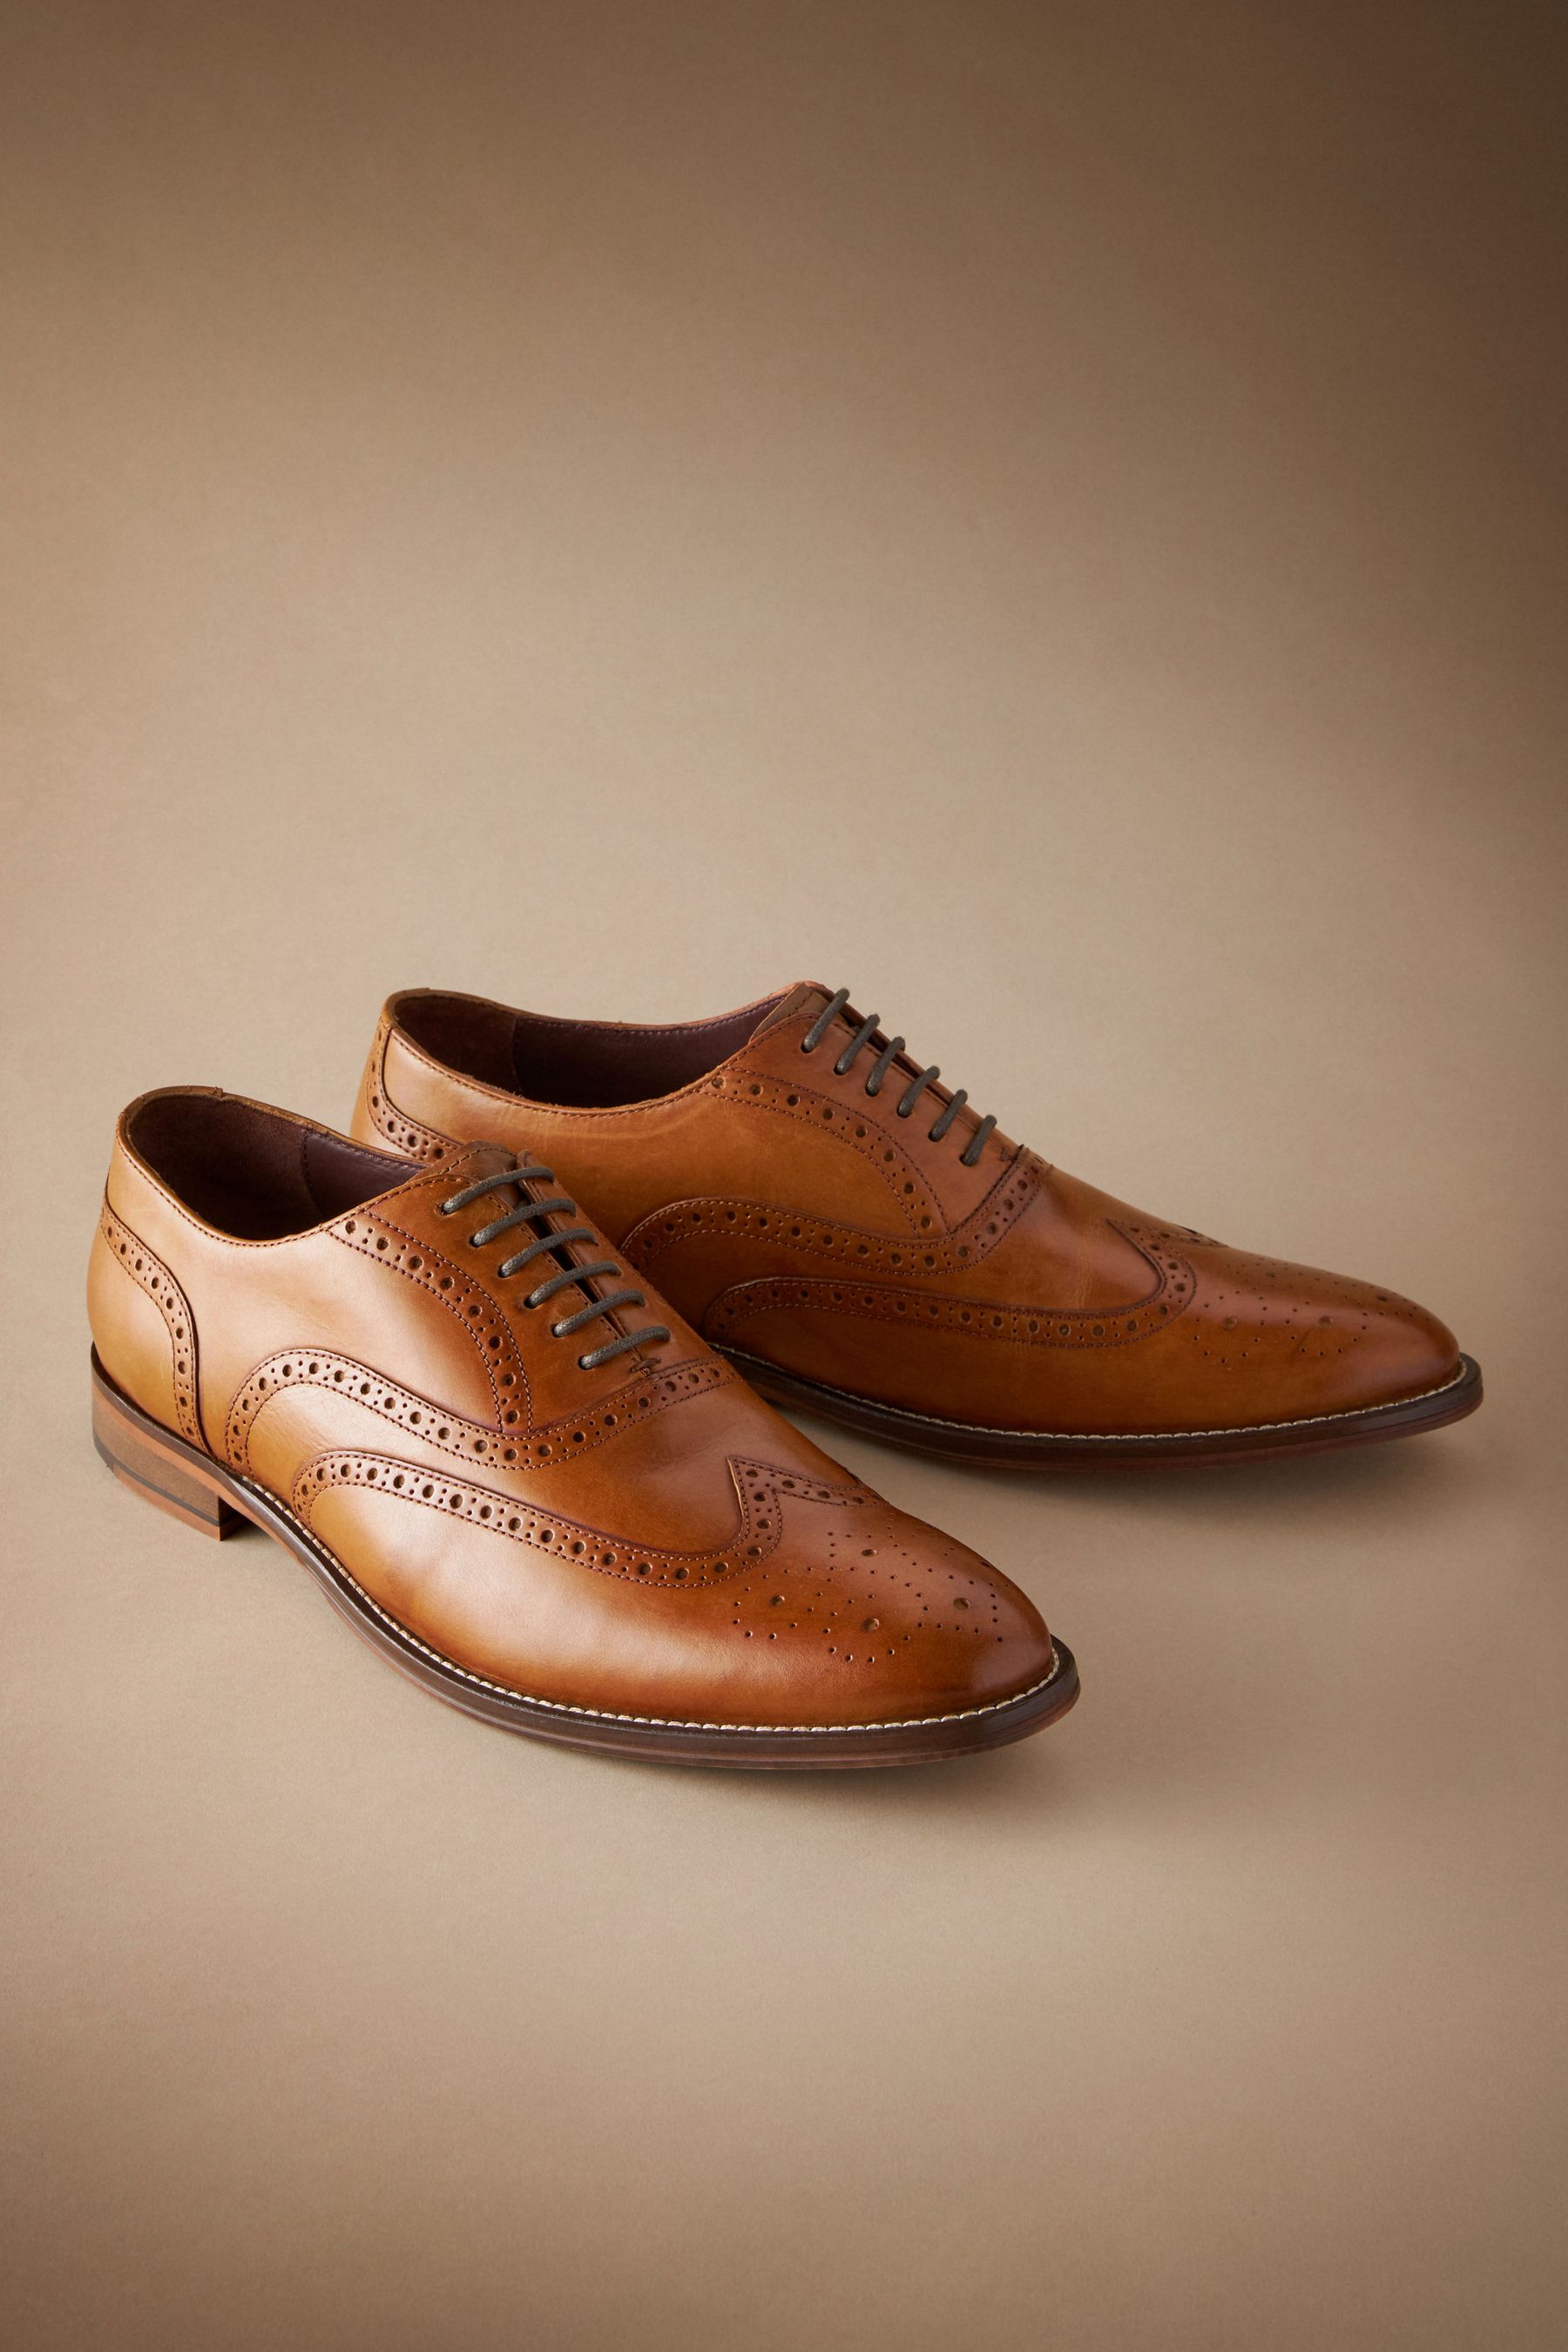 Buy Signature Italian Leather Wing Cap Brogues from the Next UK online shop